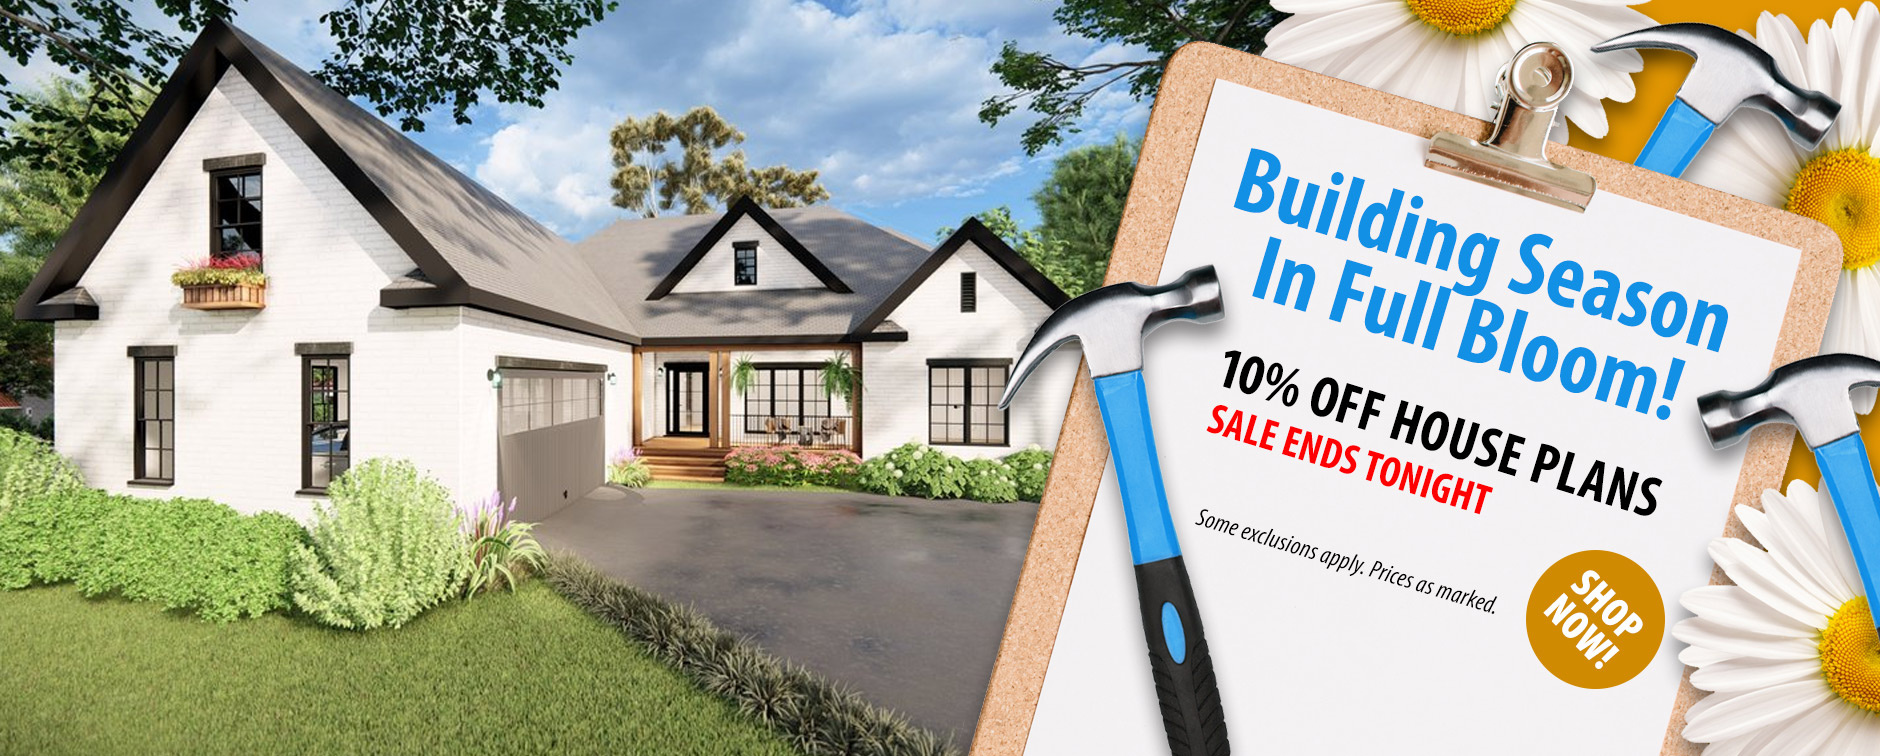 Shop the Spring Planning Event and Get 10% Off House Plans - Offer Ends Tonight